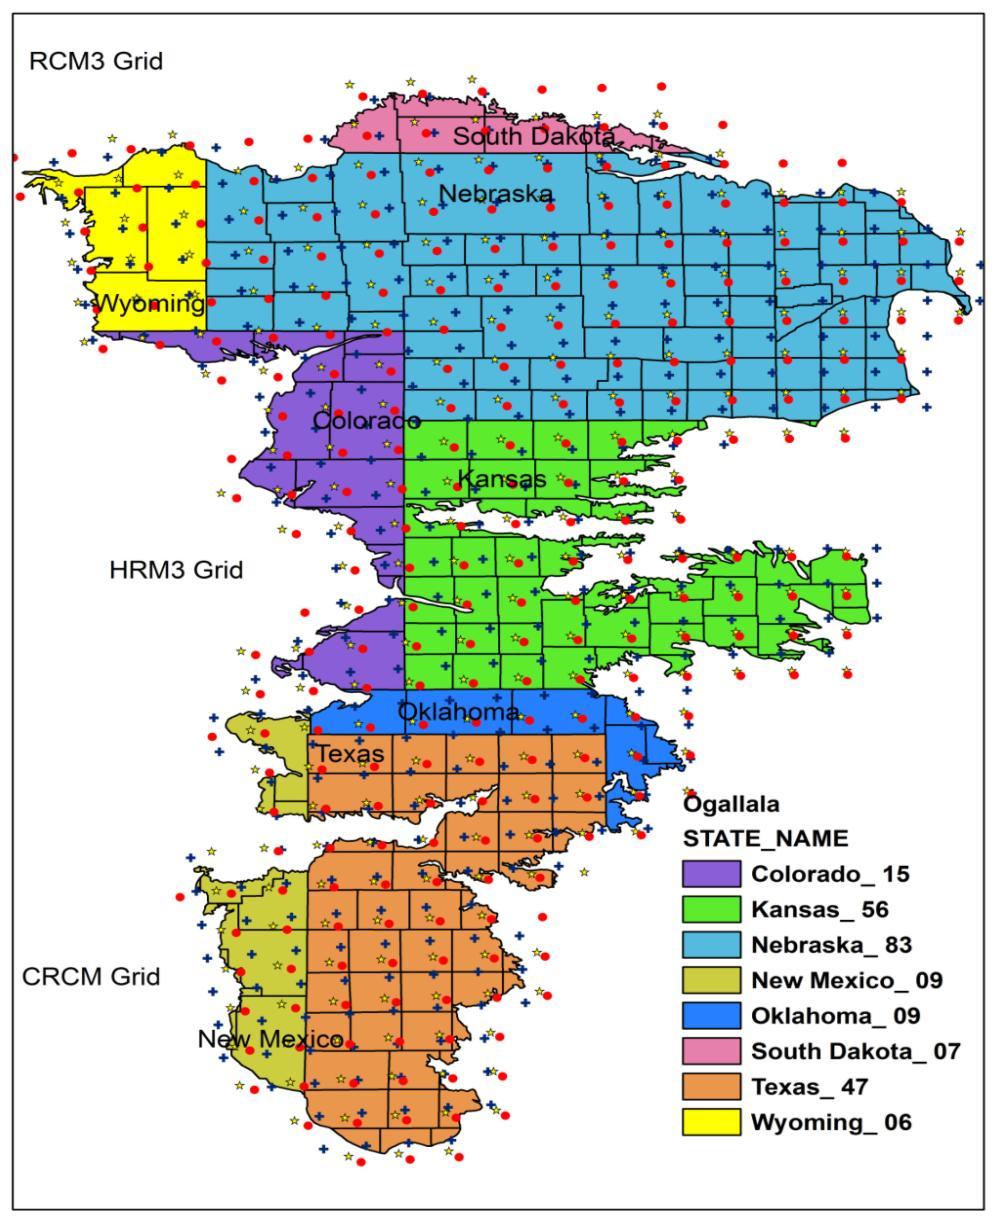 Introduction The Ogallala Aquifer Region consisting of 232 counties spread over 8 states of Conterminous United States is facing declining